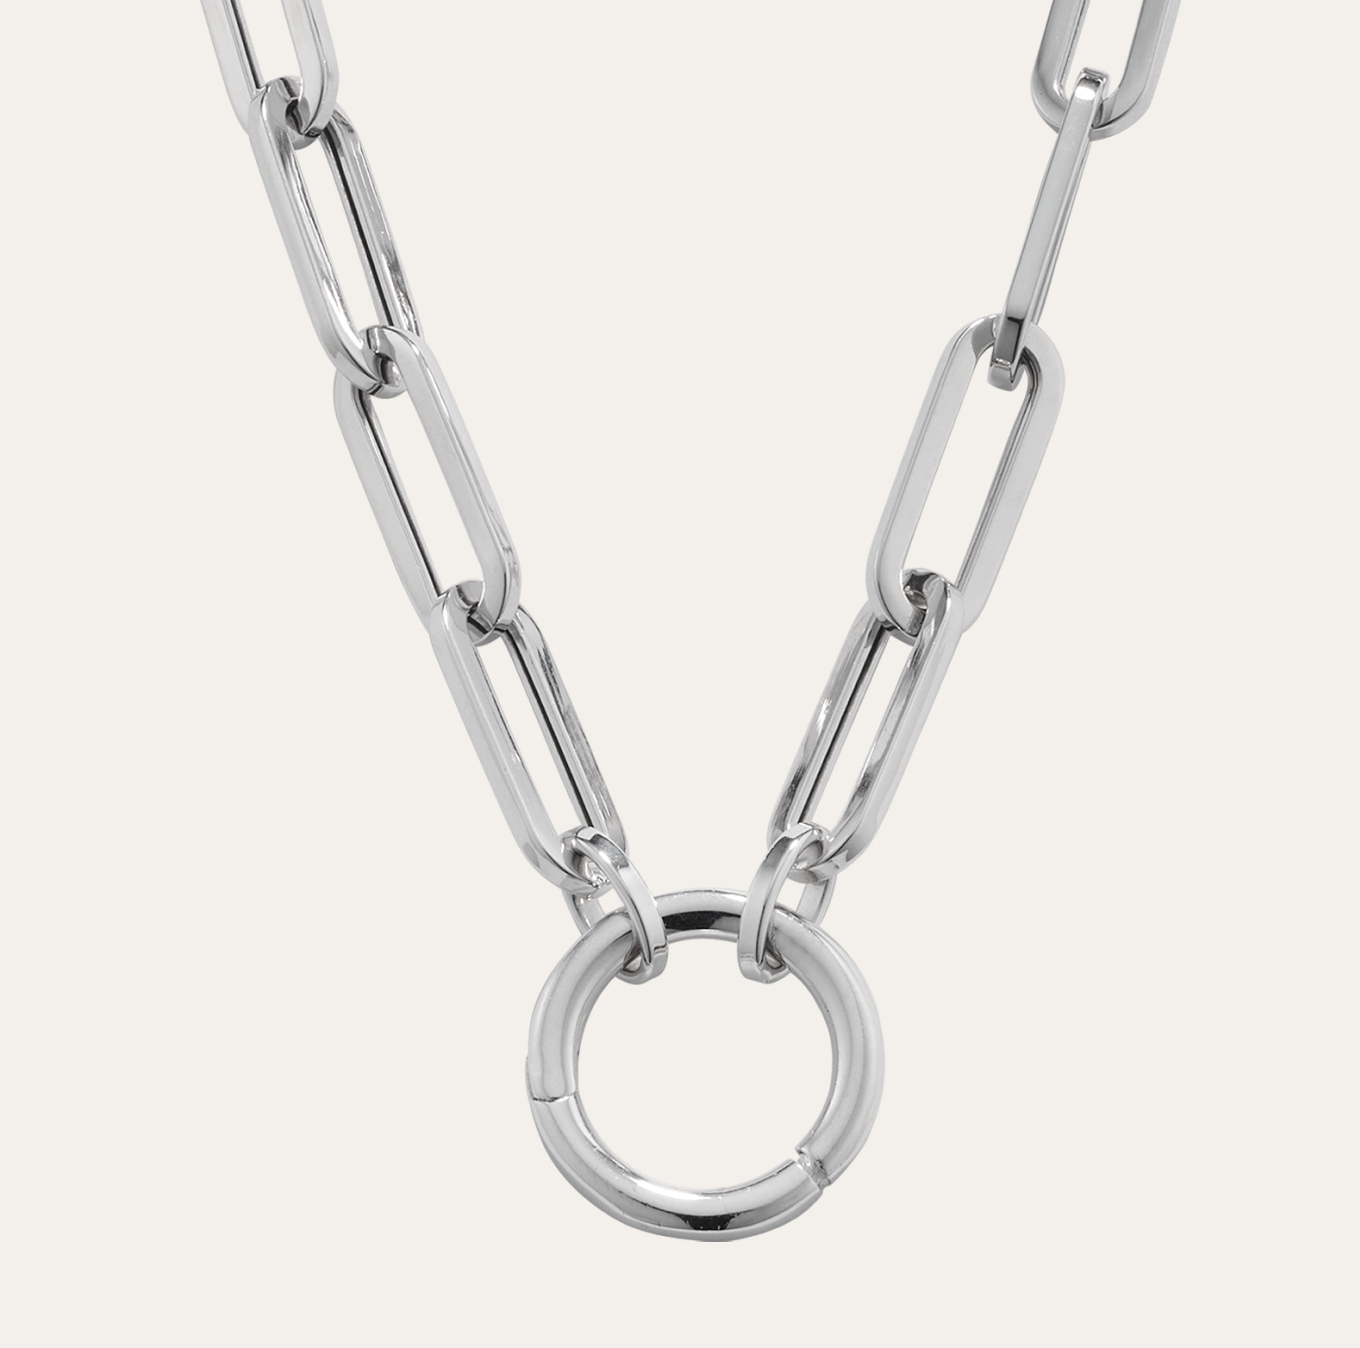 14K White Gold Paperclip Chain with Charm Ring This versatile 14-karat white gold paperclip chain elevates any look. Open the charm ring to add favorite charms, or wear as is.